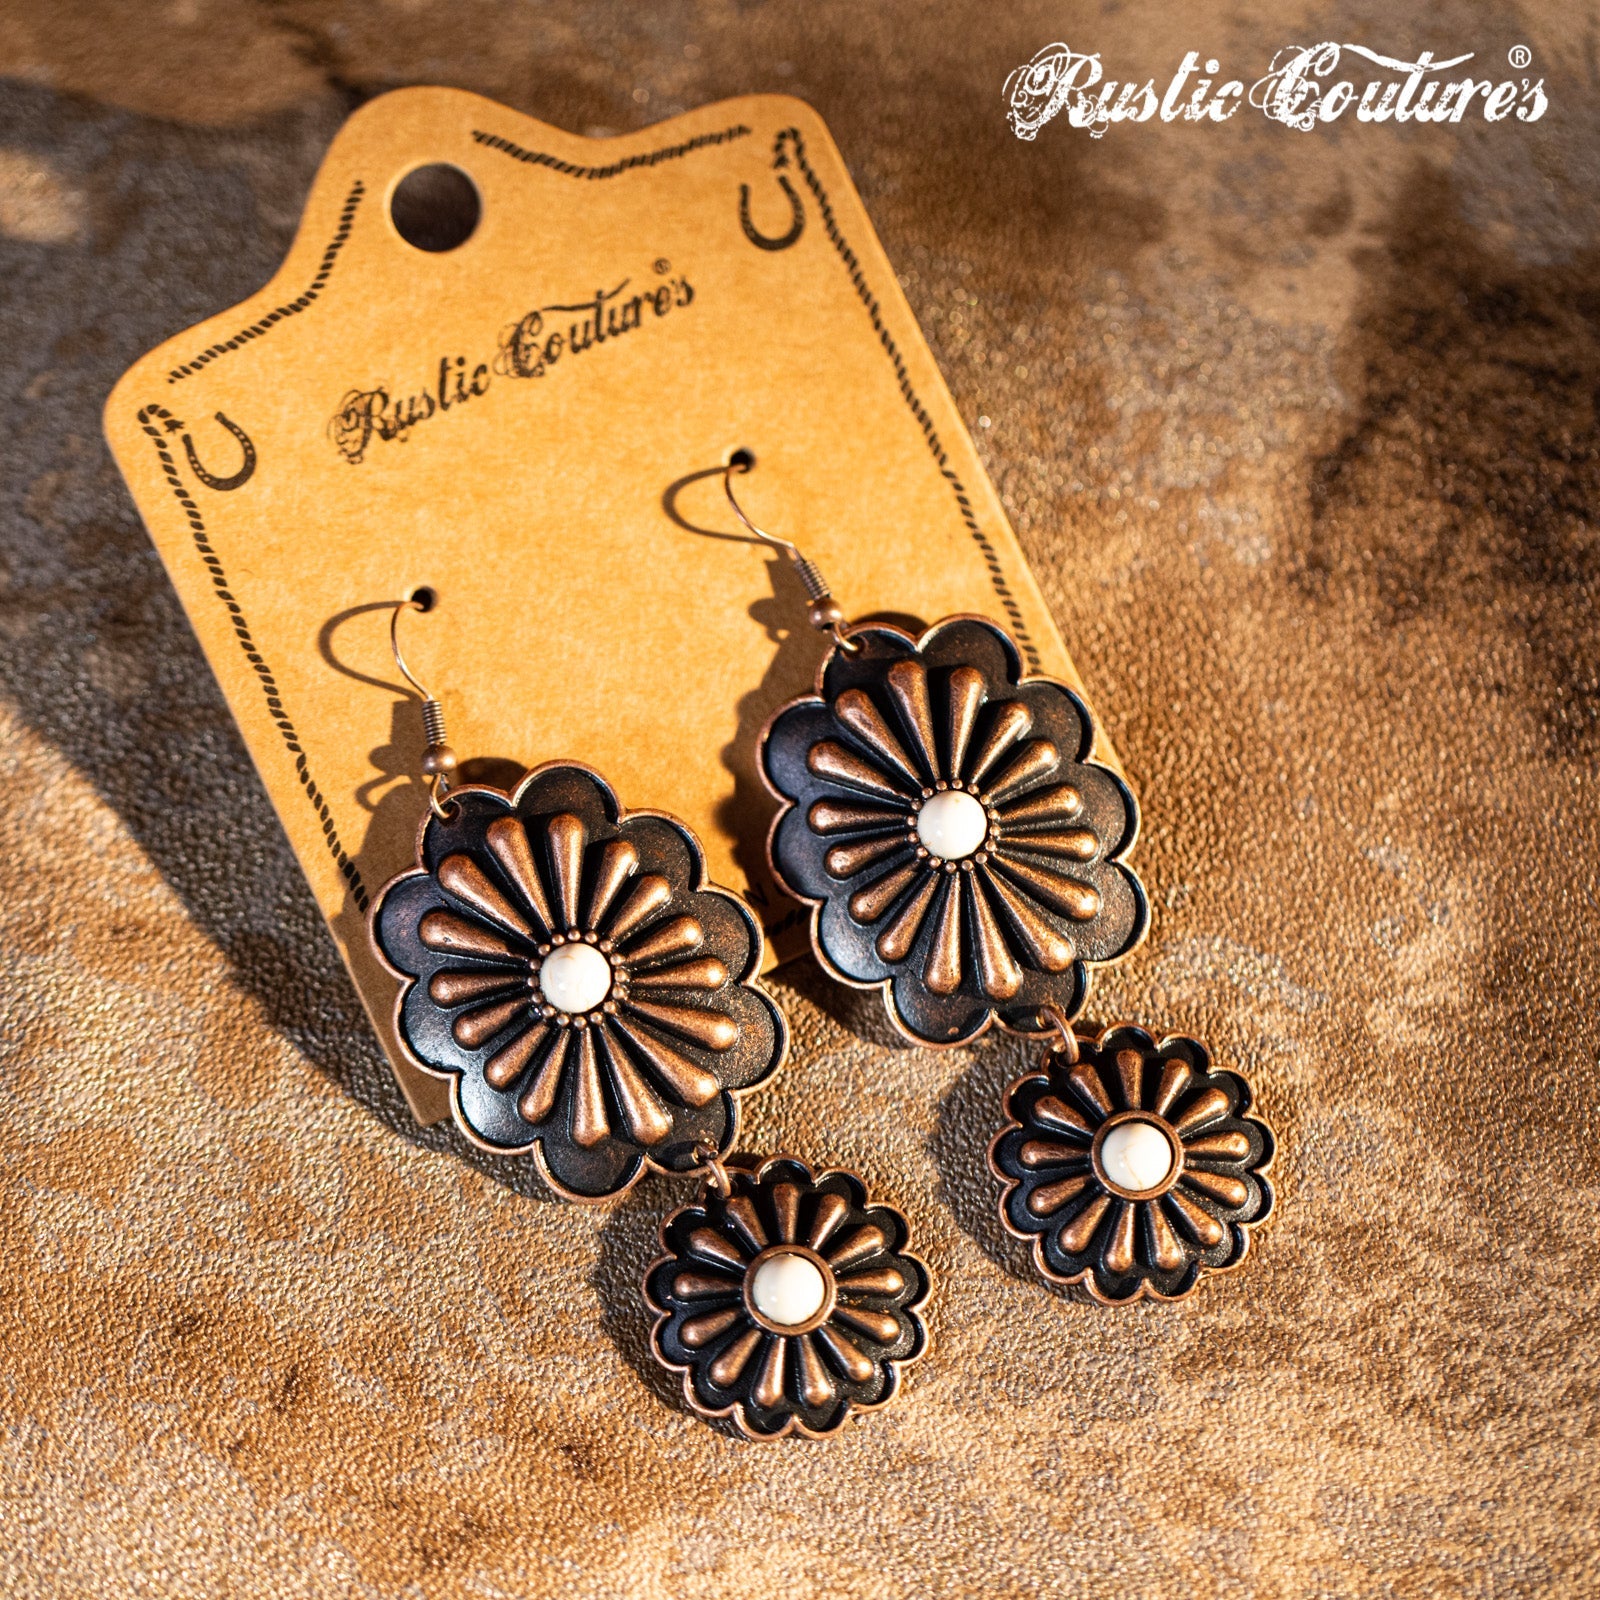 Rustic Couture's Navajo Silver Concho with Natural Stone Dangling Earring - Montana West World